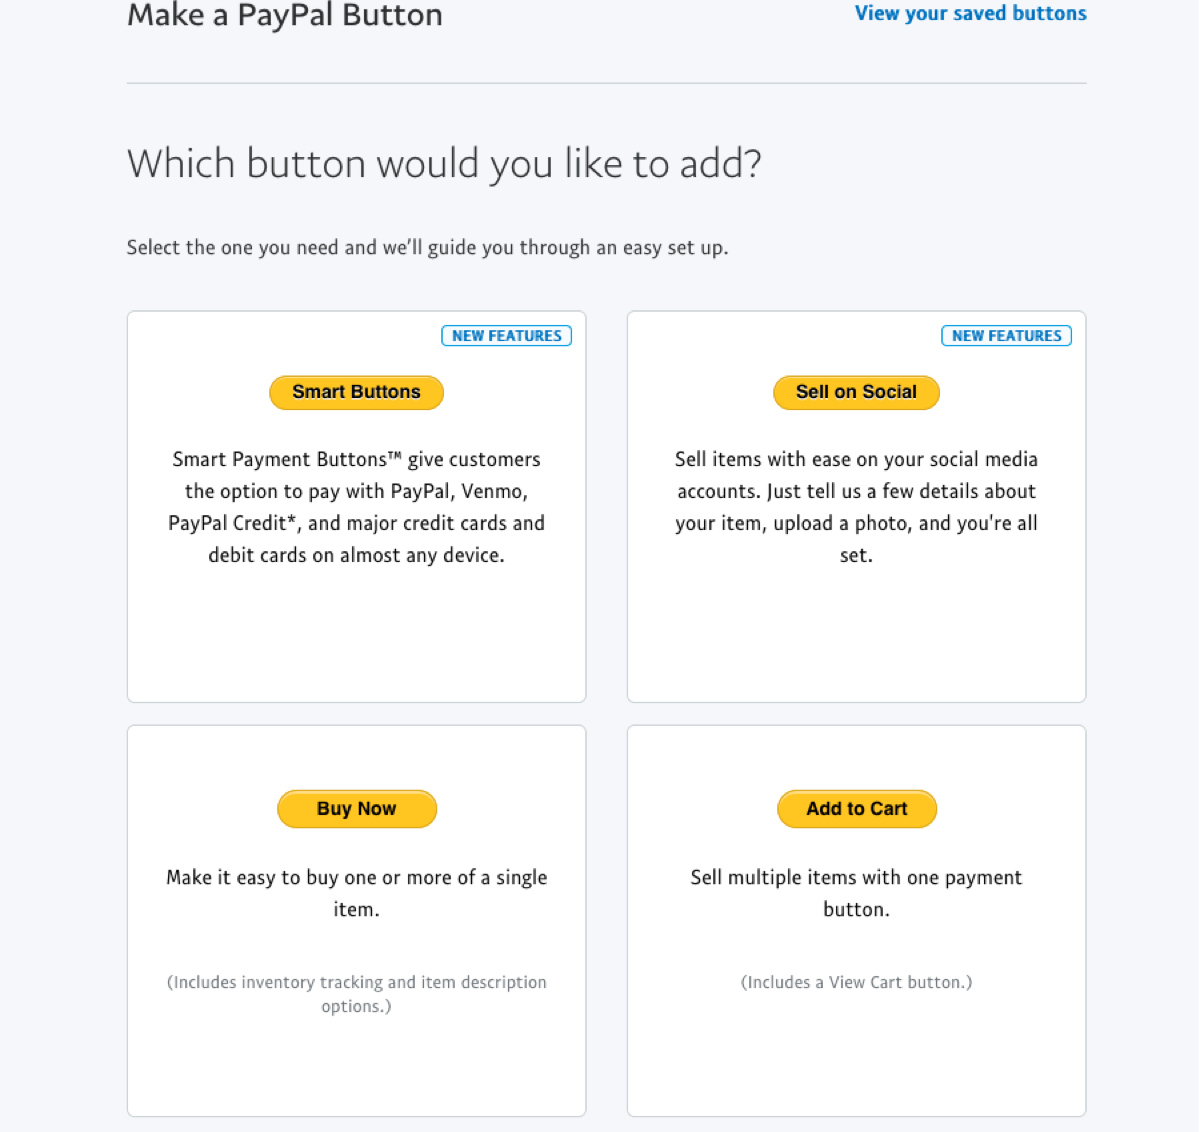 Access the Buttons section of your PayPal account